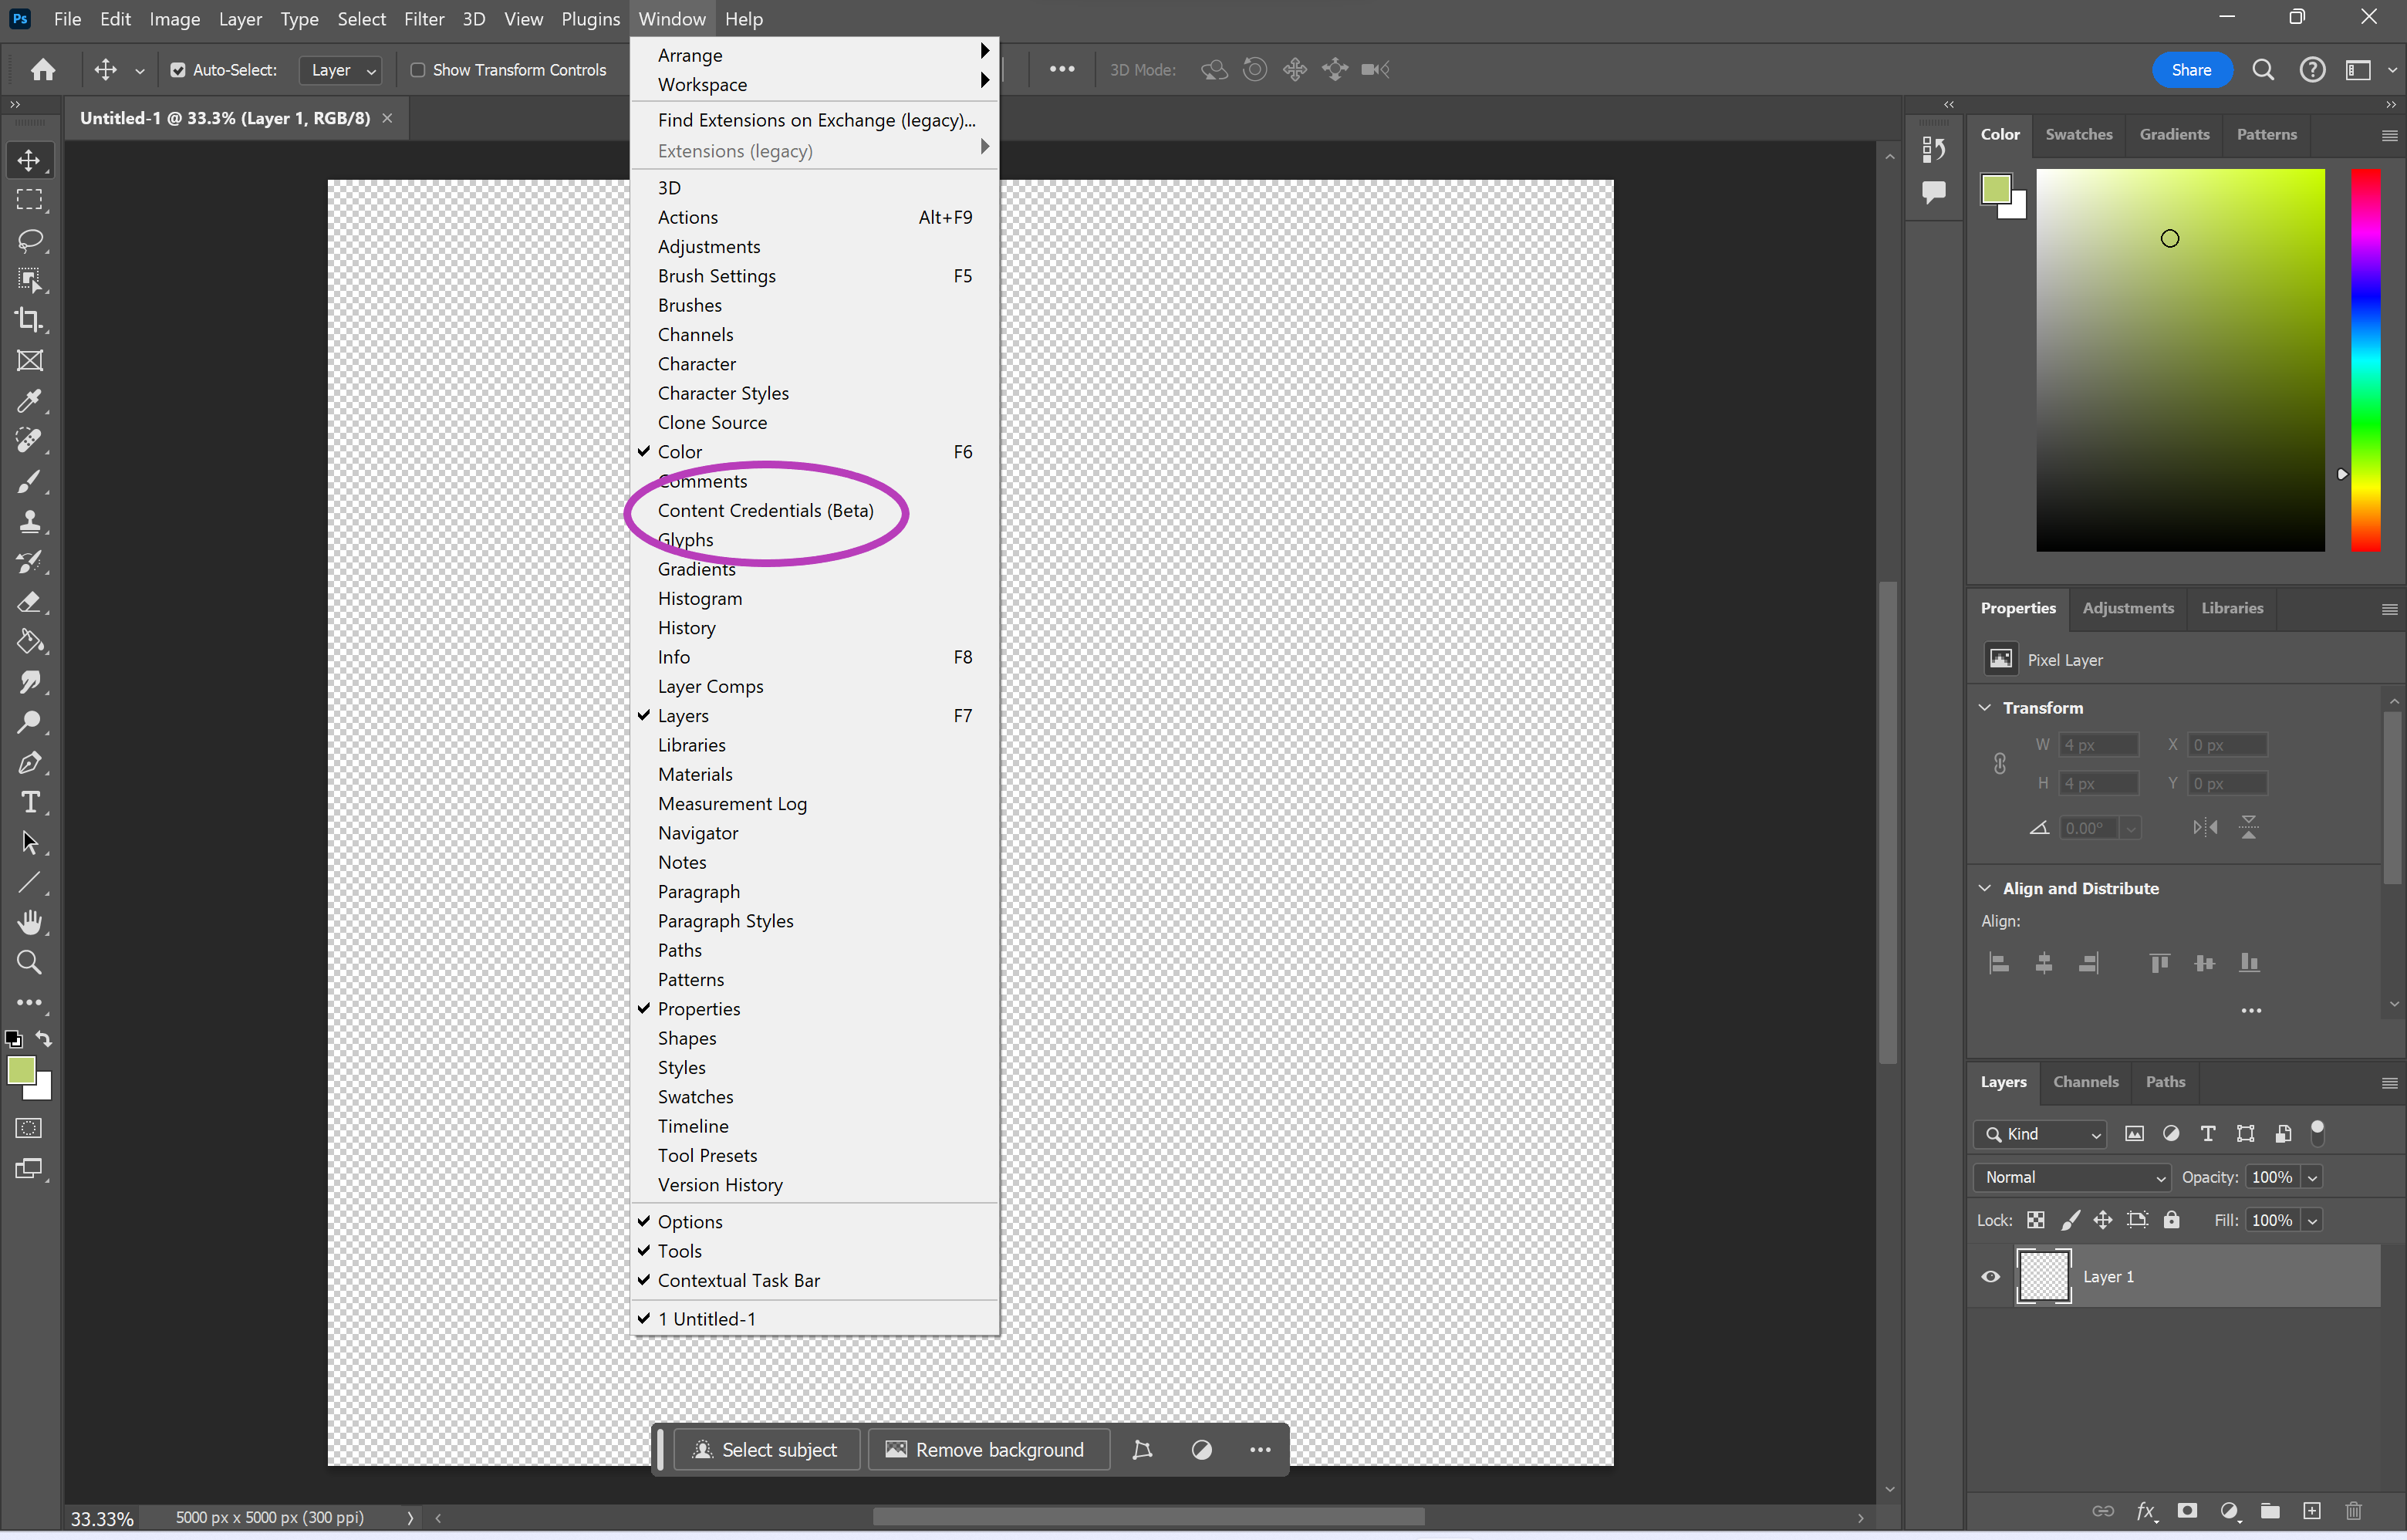 How to add Content Credentials to an image in Photoshop